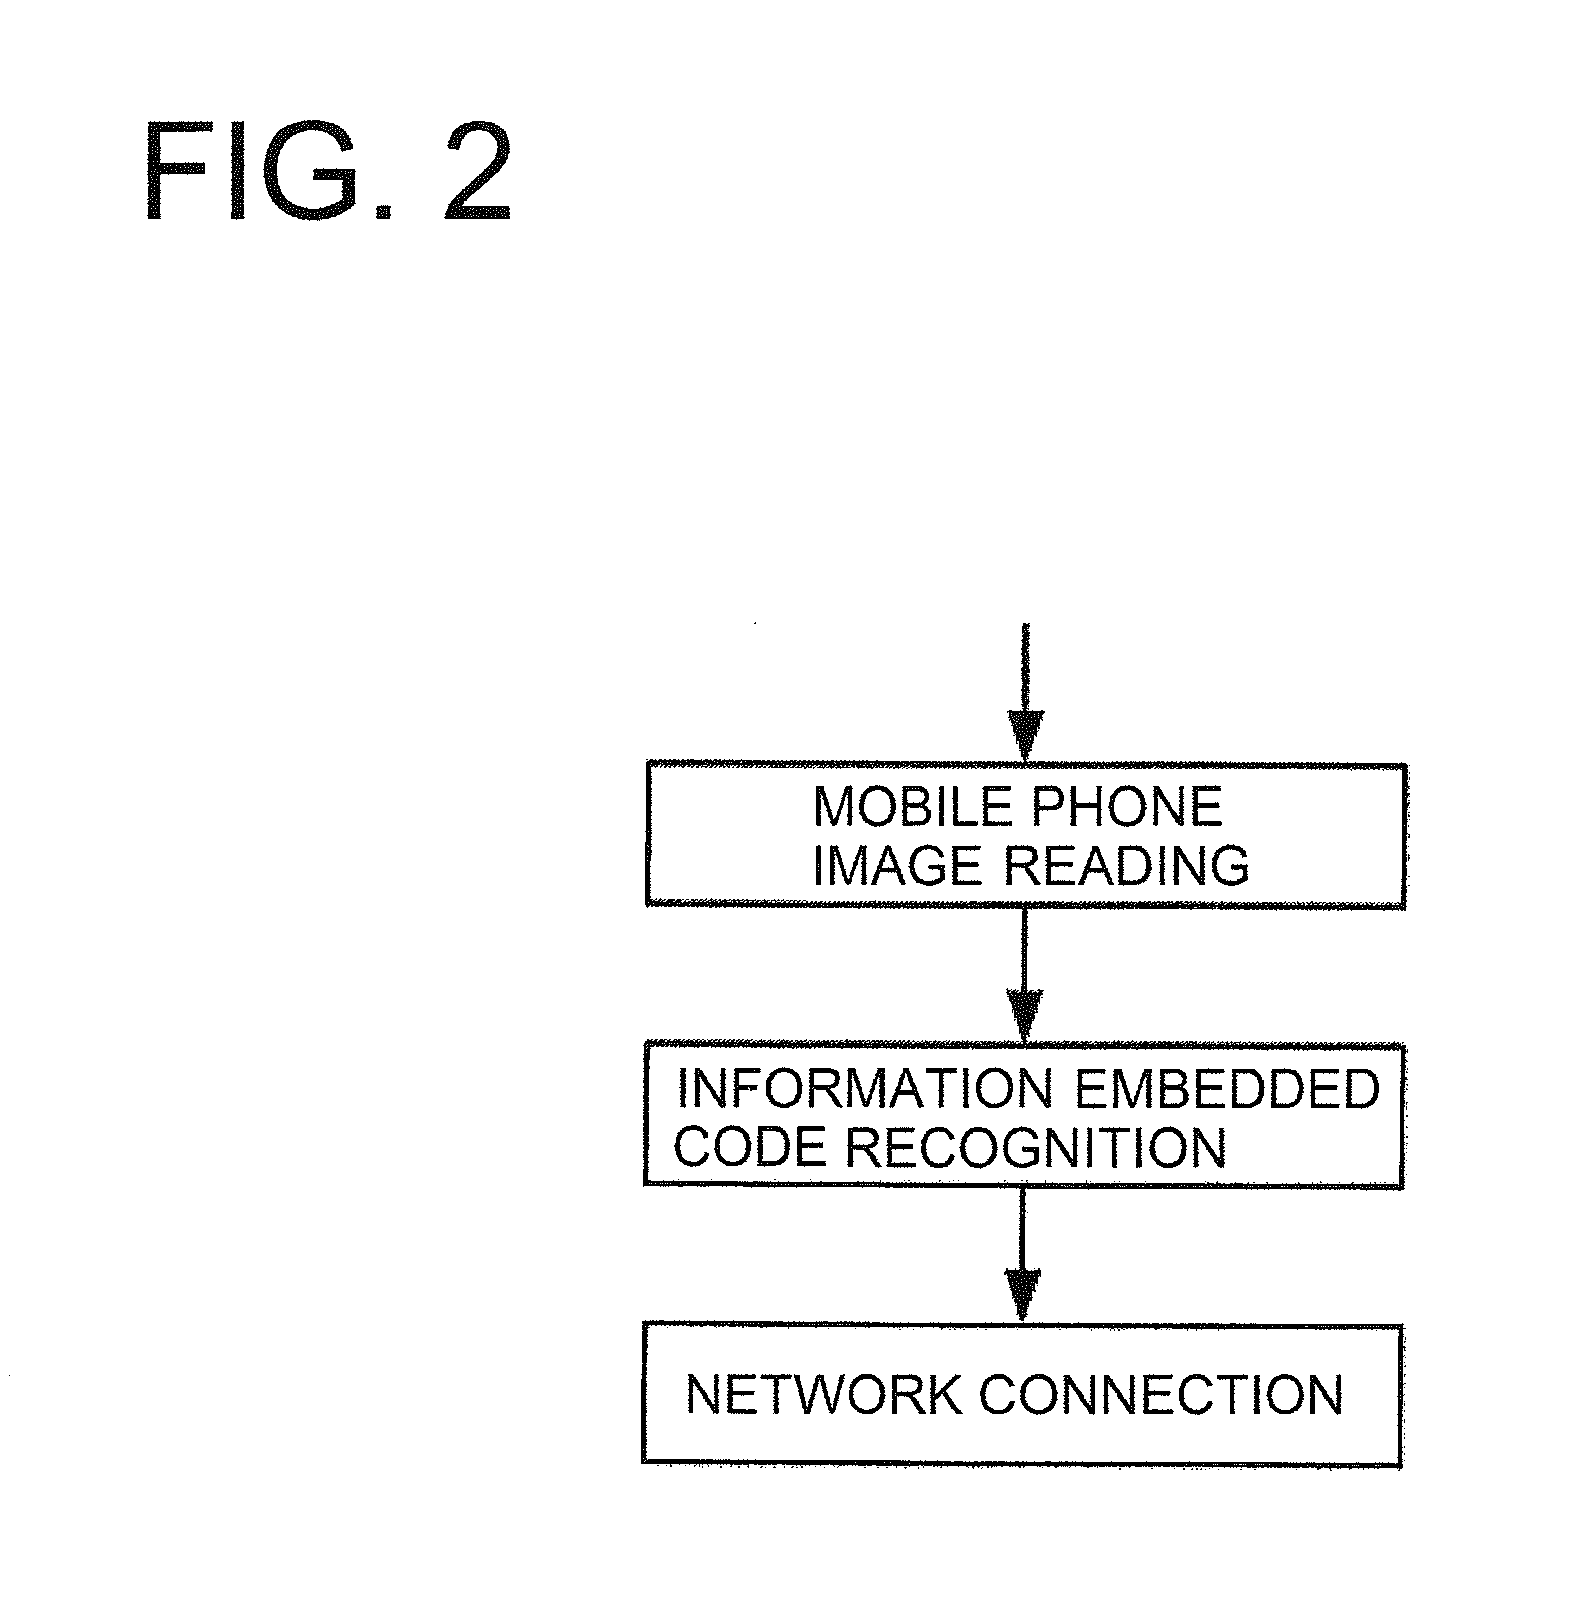 Method for generating information embedded code for mobile phone, method for embedding information code, and method for reading the same